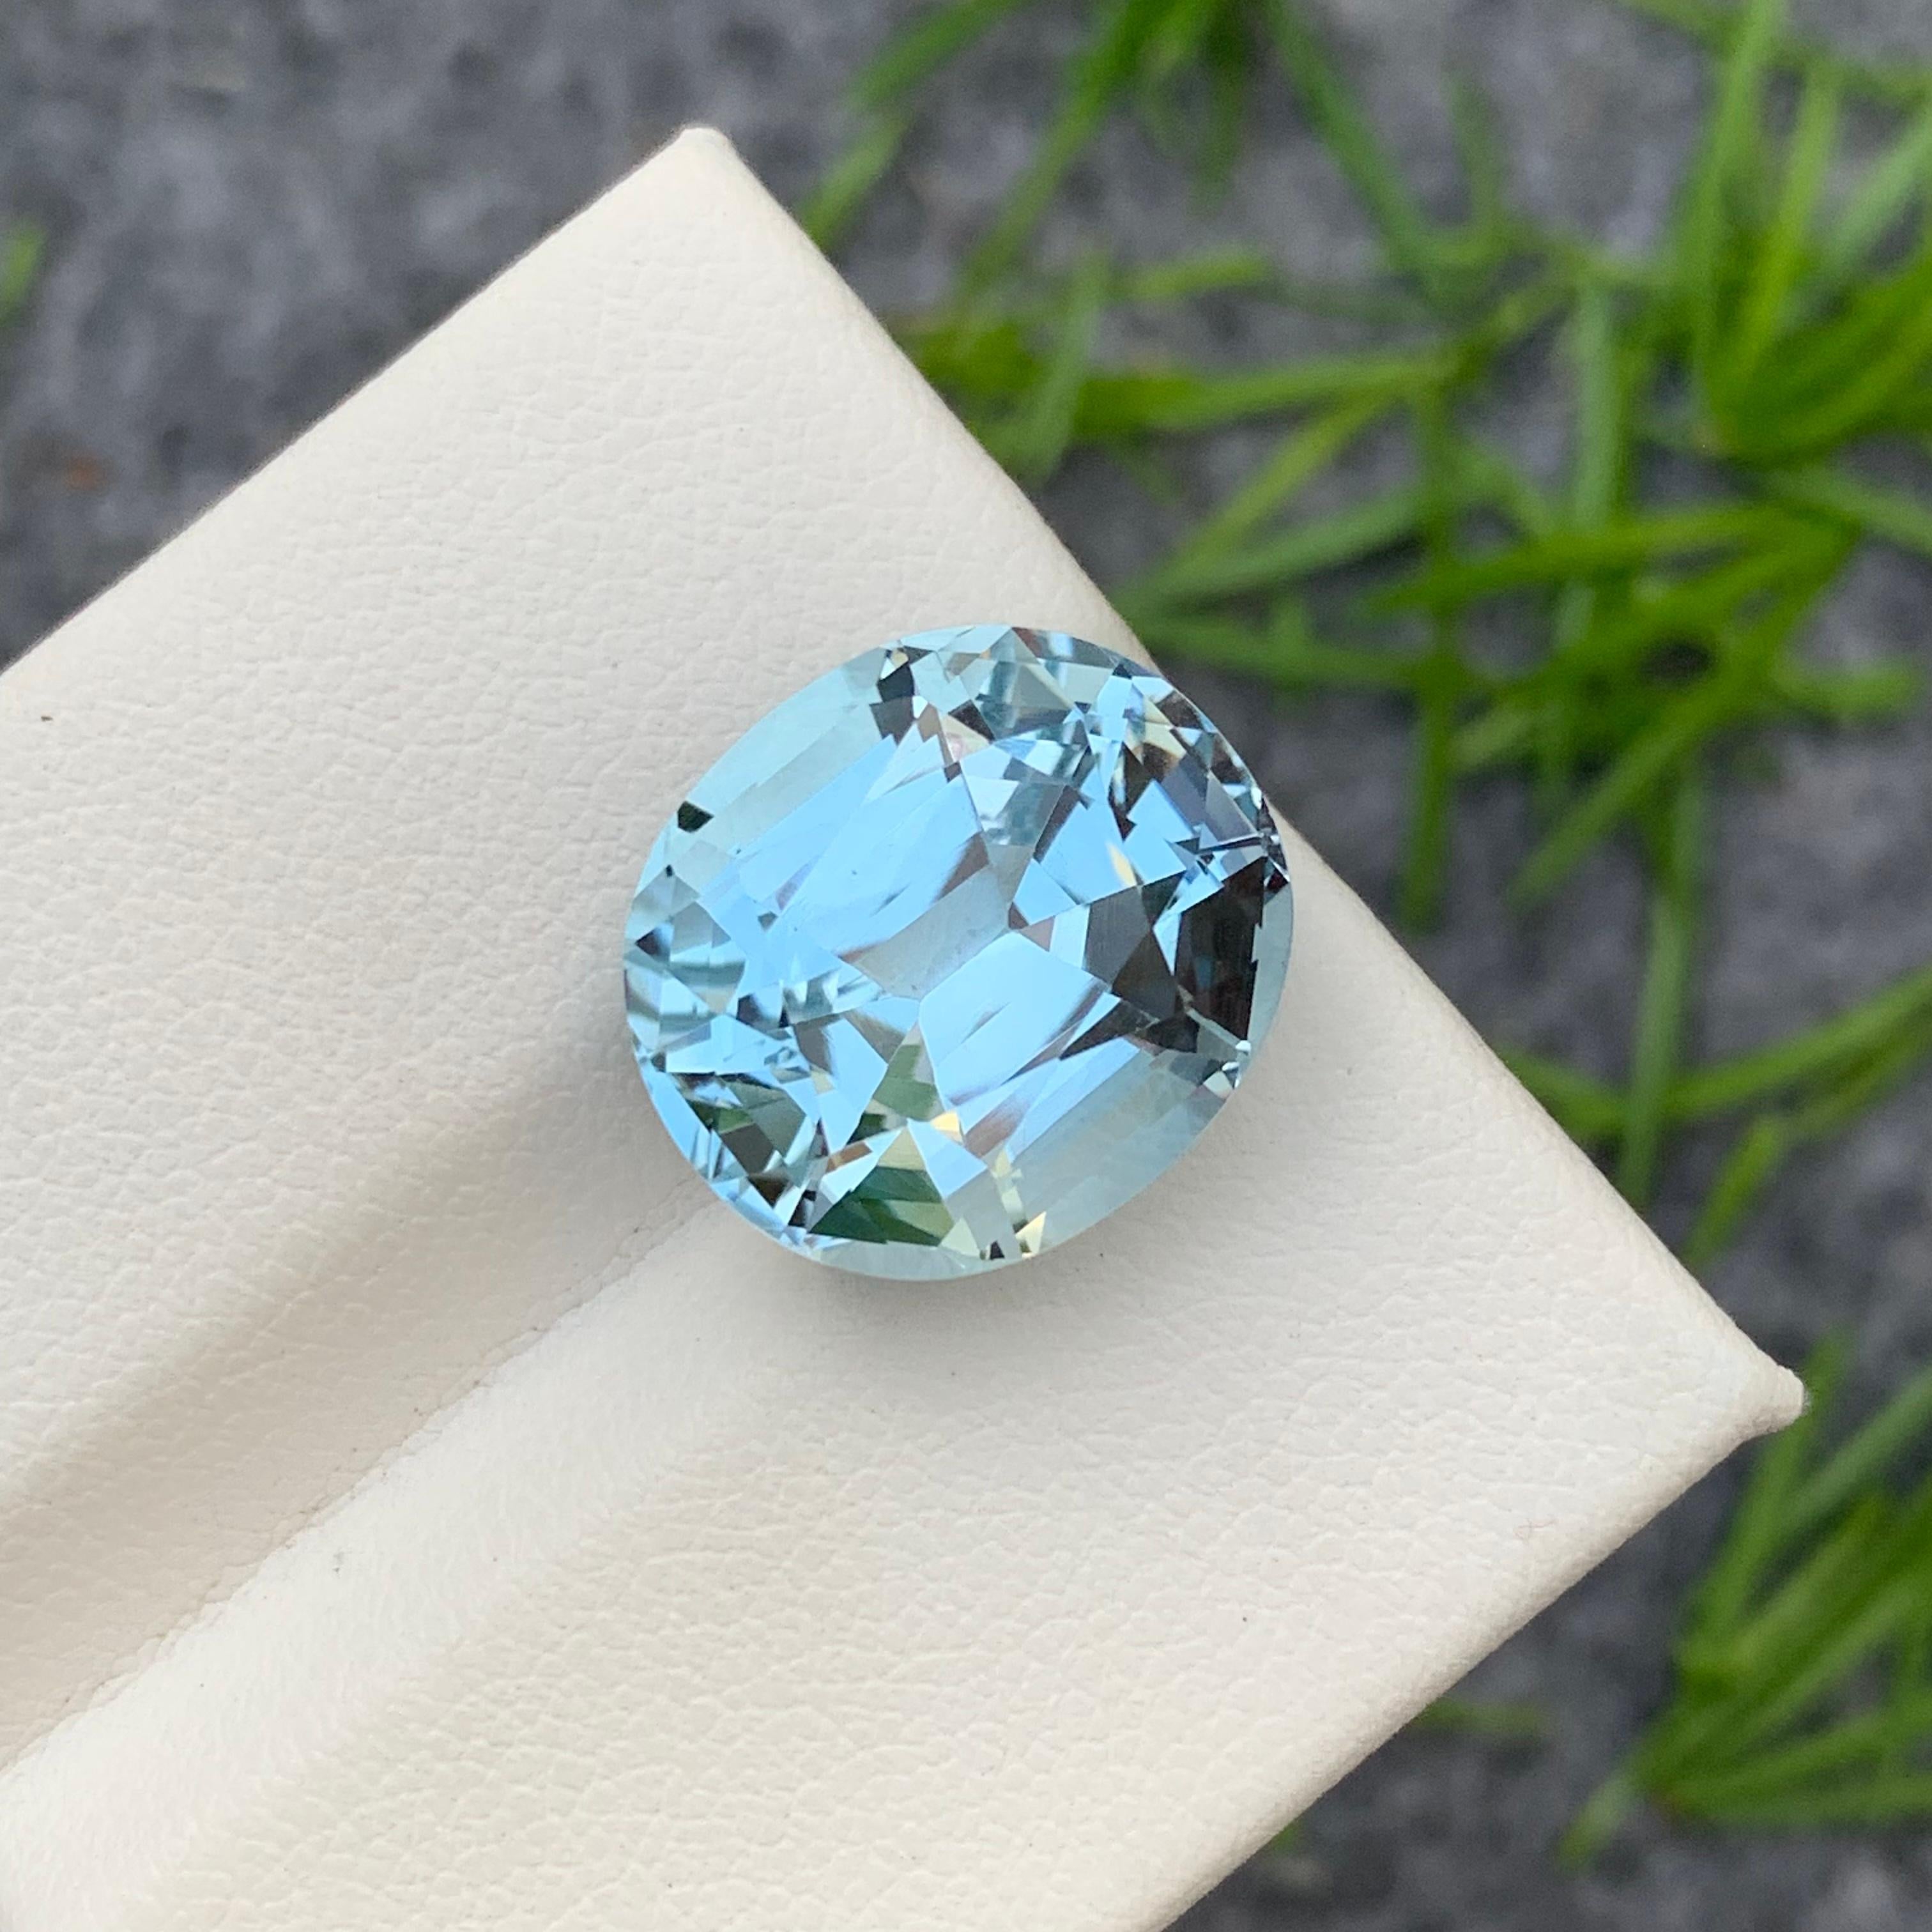 18.75 Carat Faceted Light Blue Topaz Cushion Cut Gemstone from Brazil Mine For Sale 9